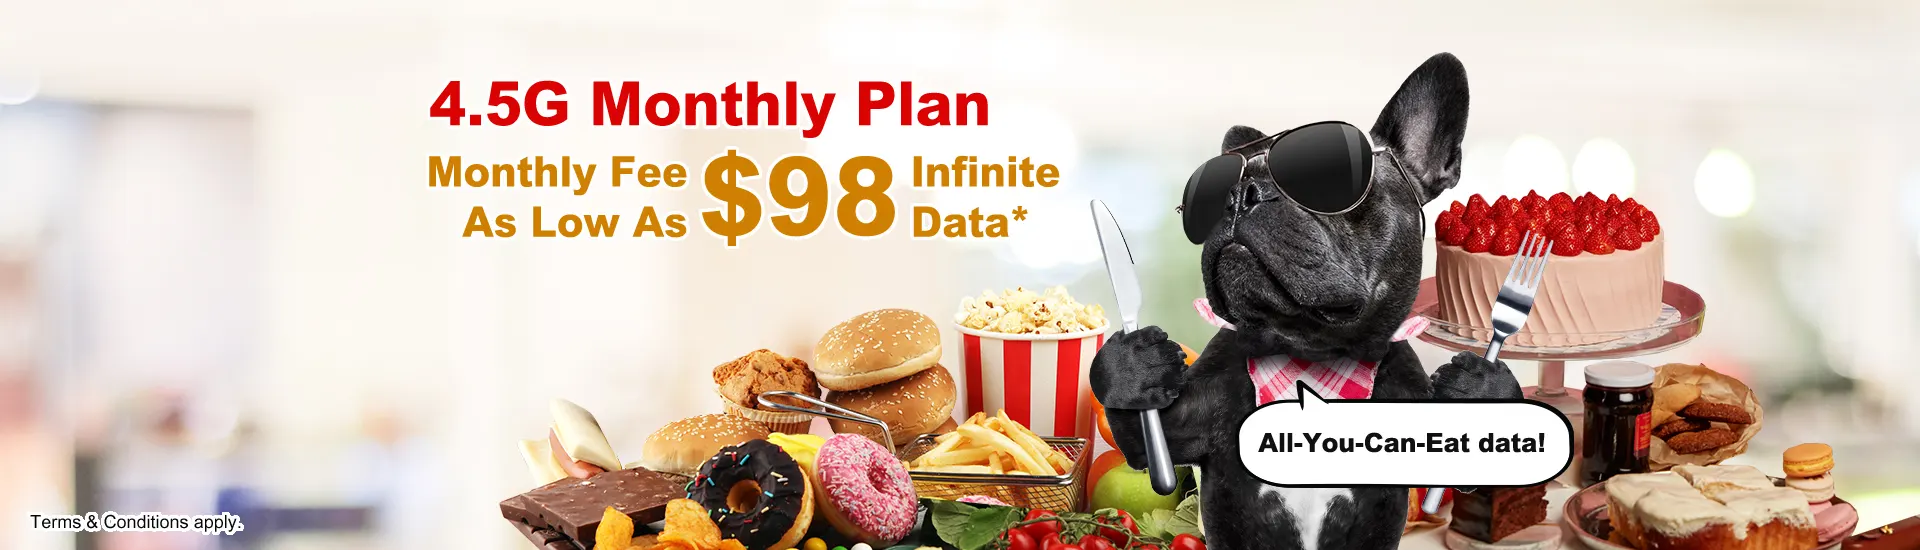 4.5G Monthly Plan, Monthly Fee As Low As $98, Infinite Data